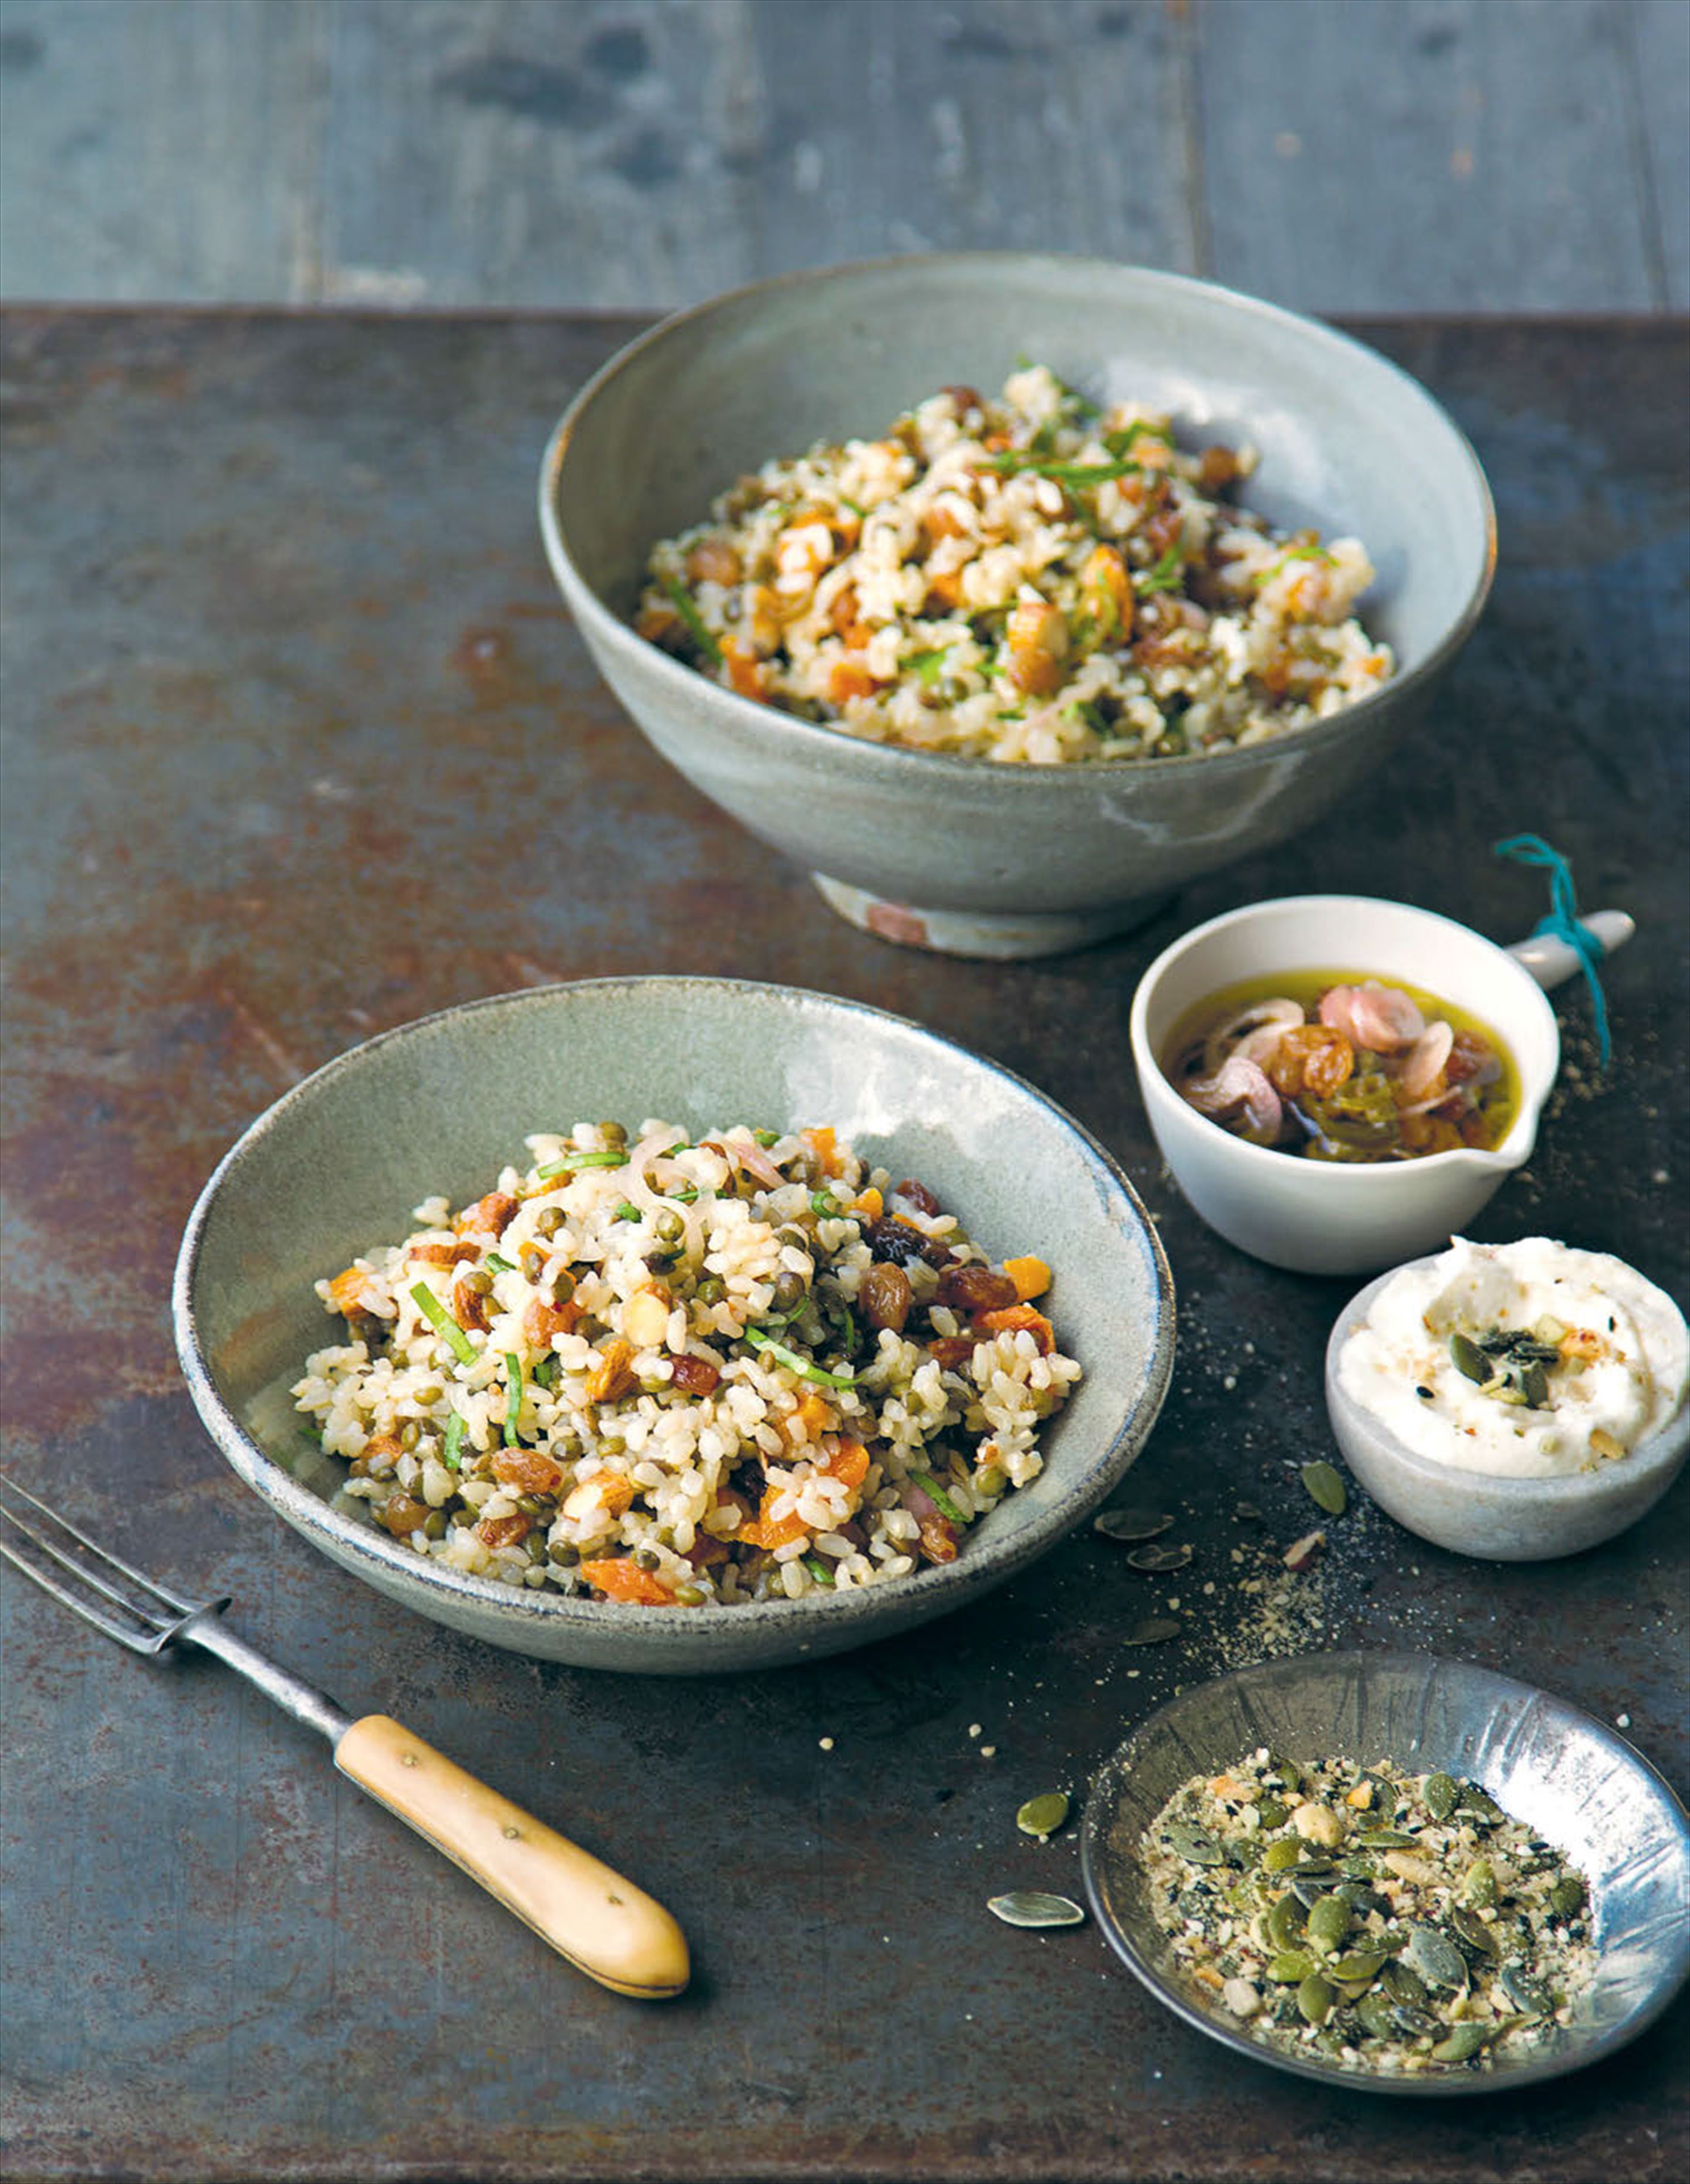 Brown rice and feta salad with hot ’n’ sour dressing